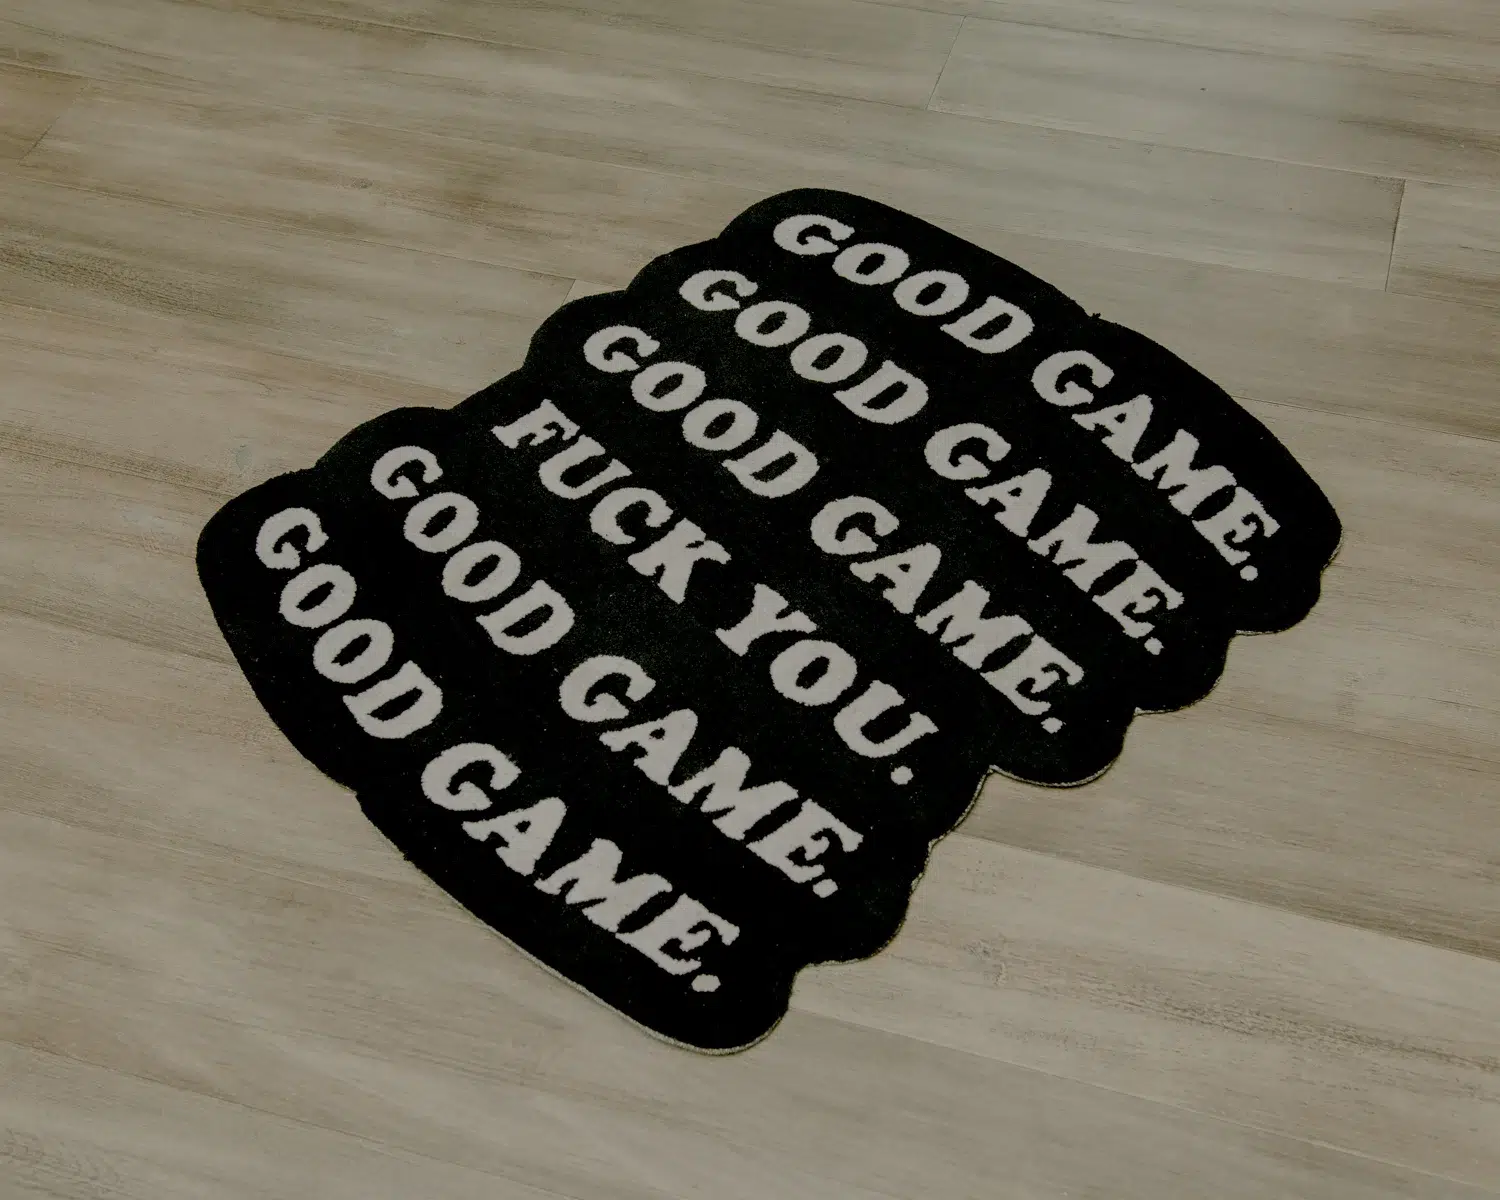 A rug that exclaims "Good game" with a touch of attitude.